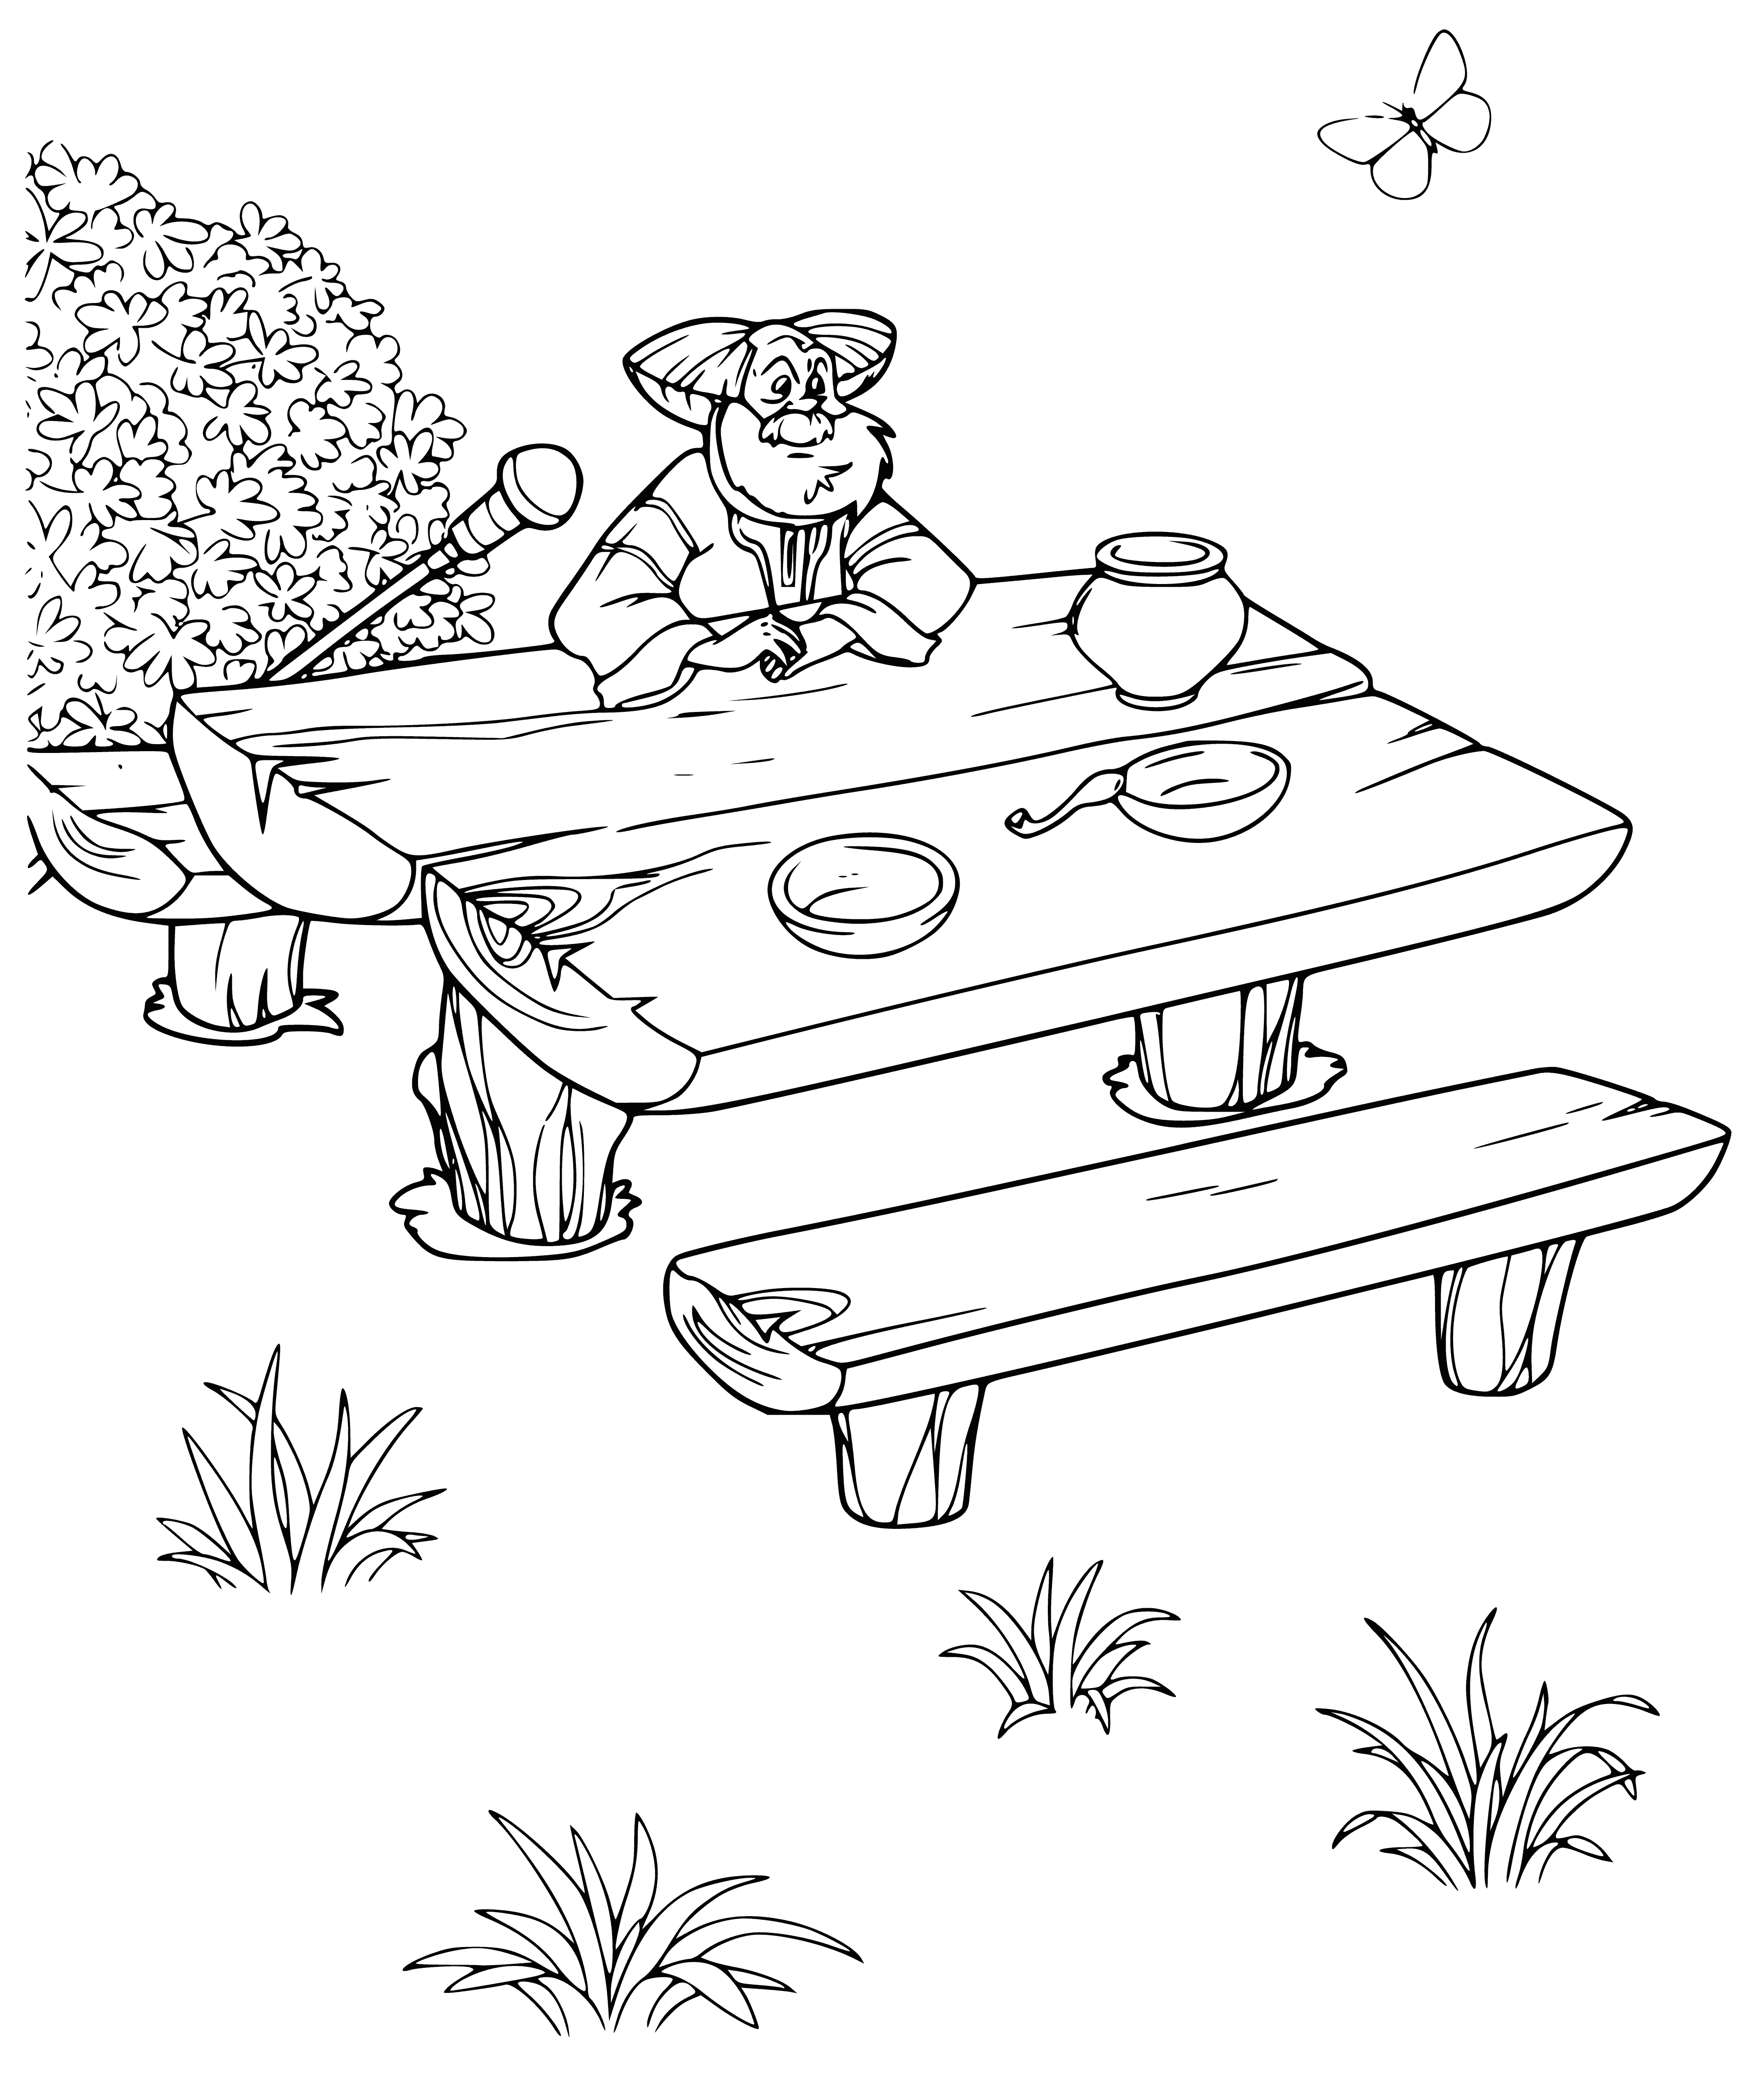 coloring page: Old man & boy sit at a table, old man reads book & has gold ring; boy listens intently, wearing blue shirt. #coloringpage